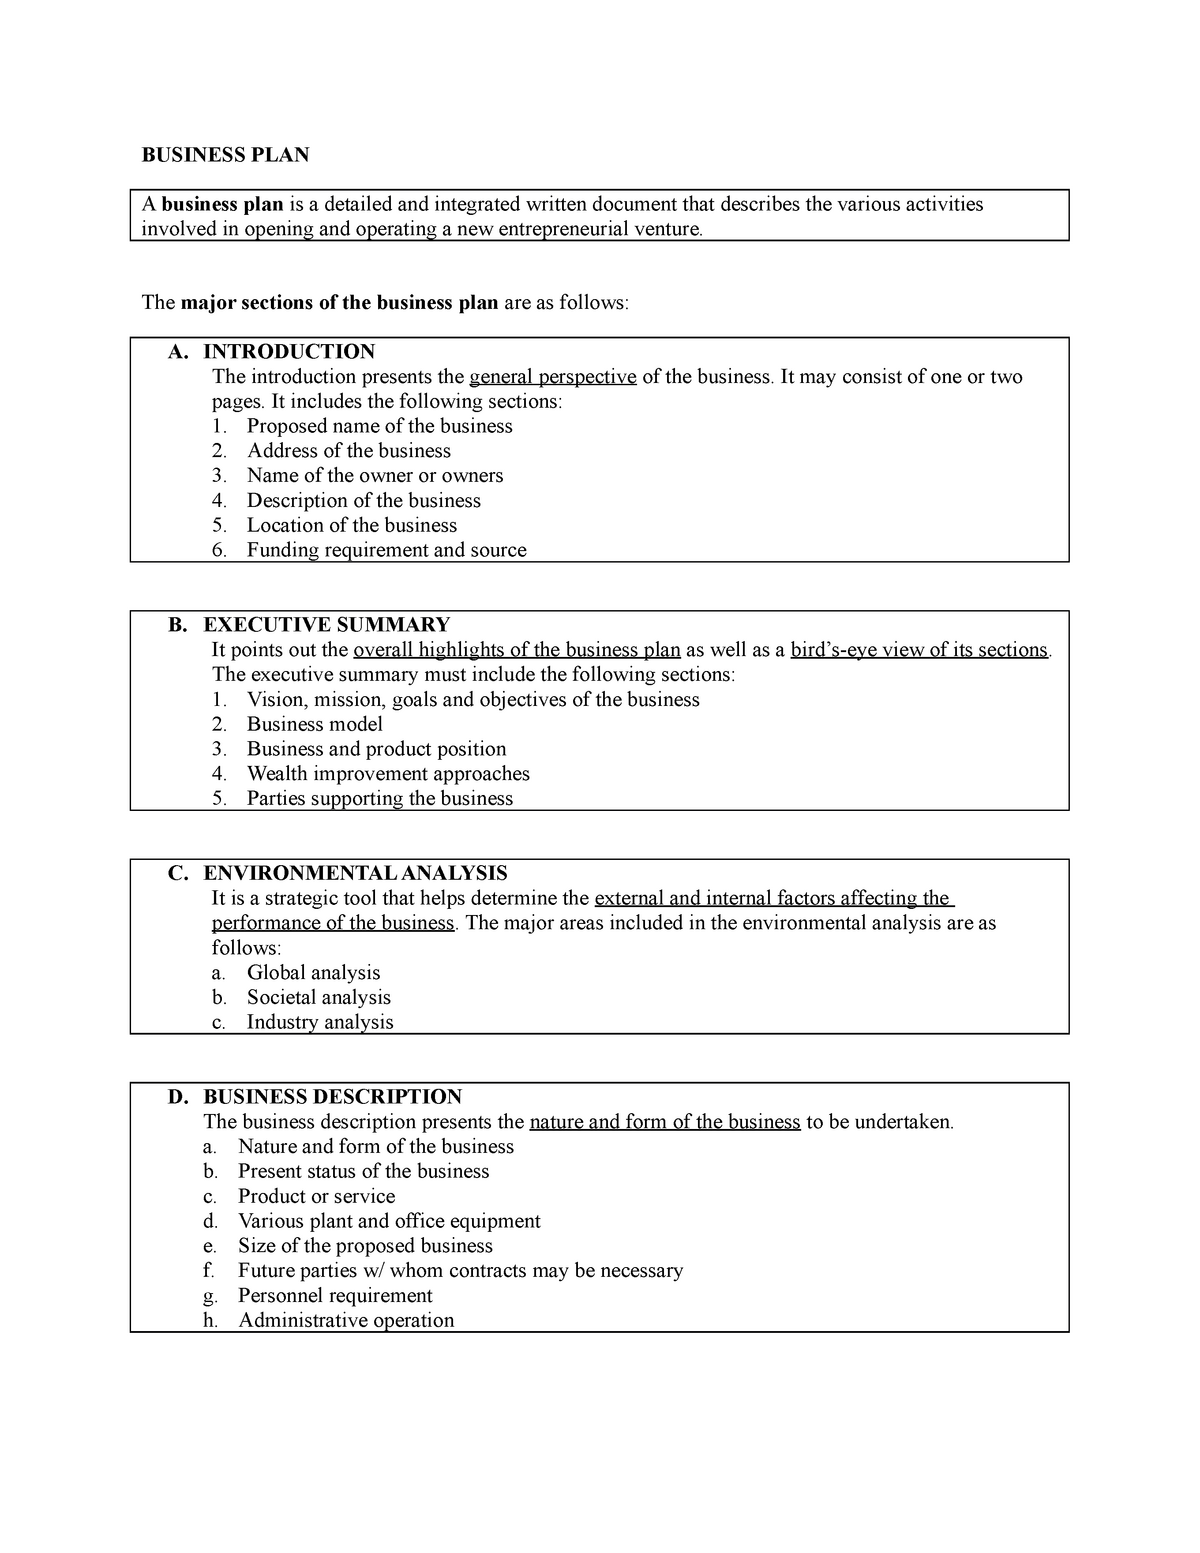 business plan lecture notes pdf